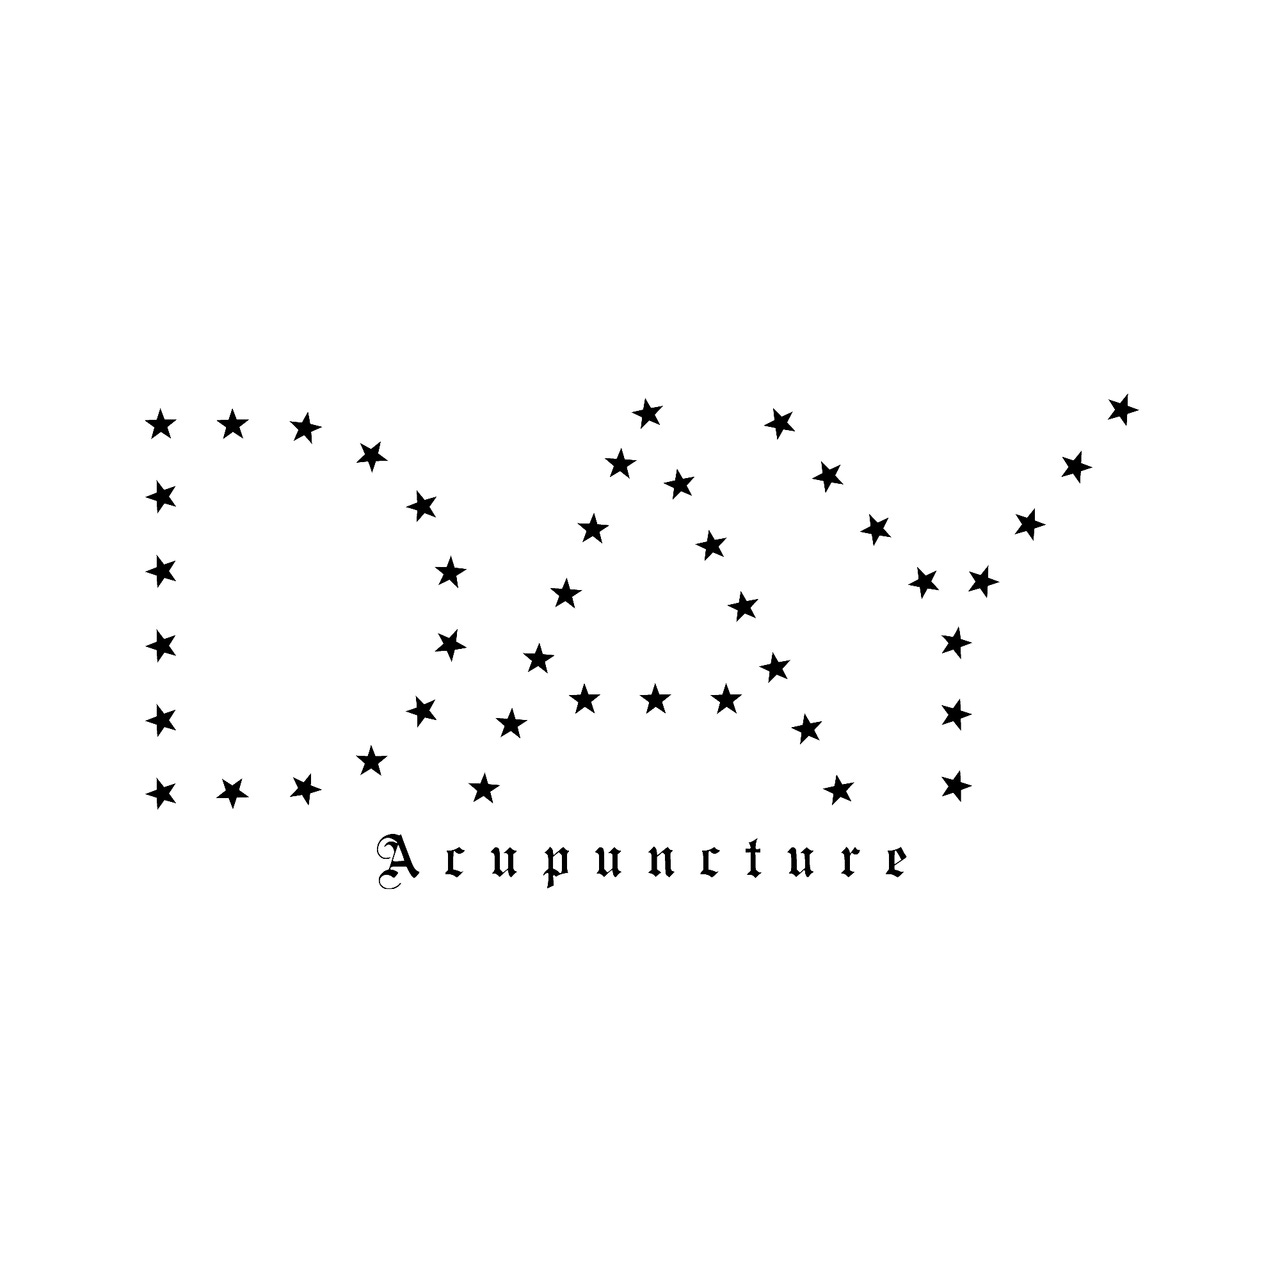 Day Acupuncture Newsletter